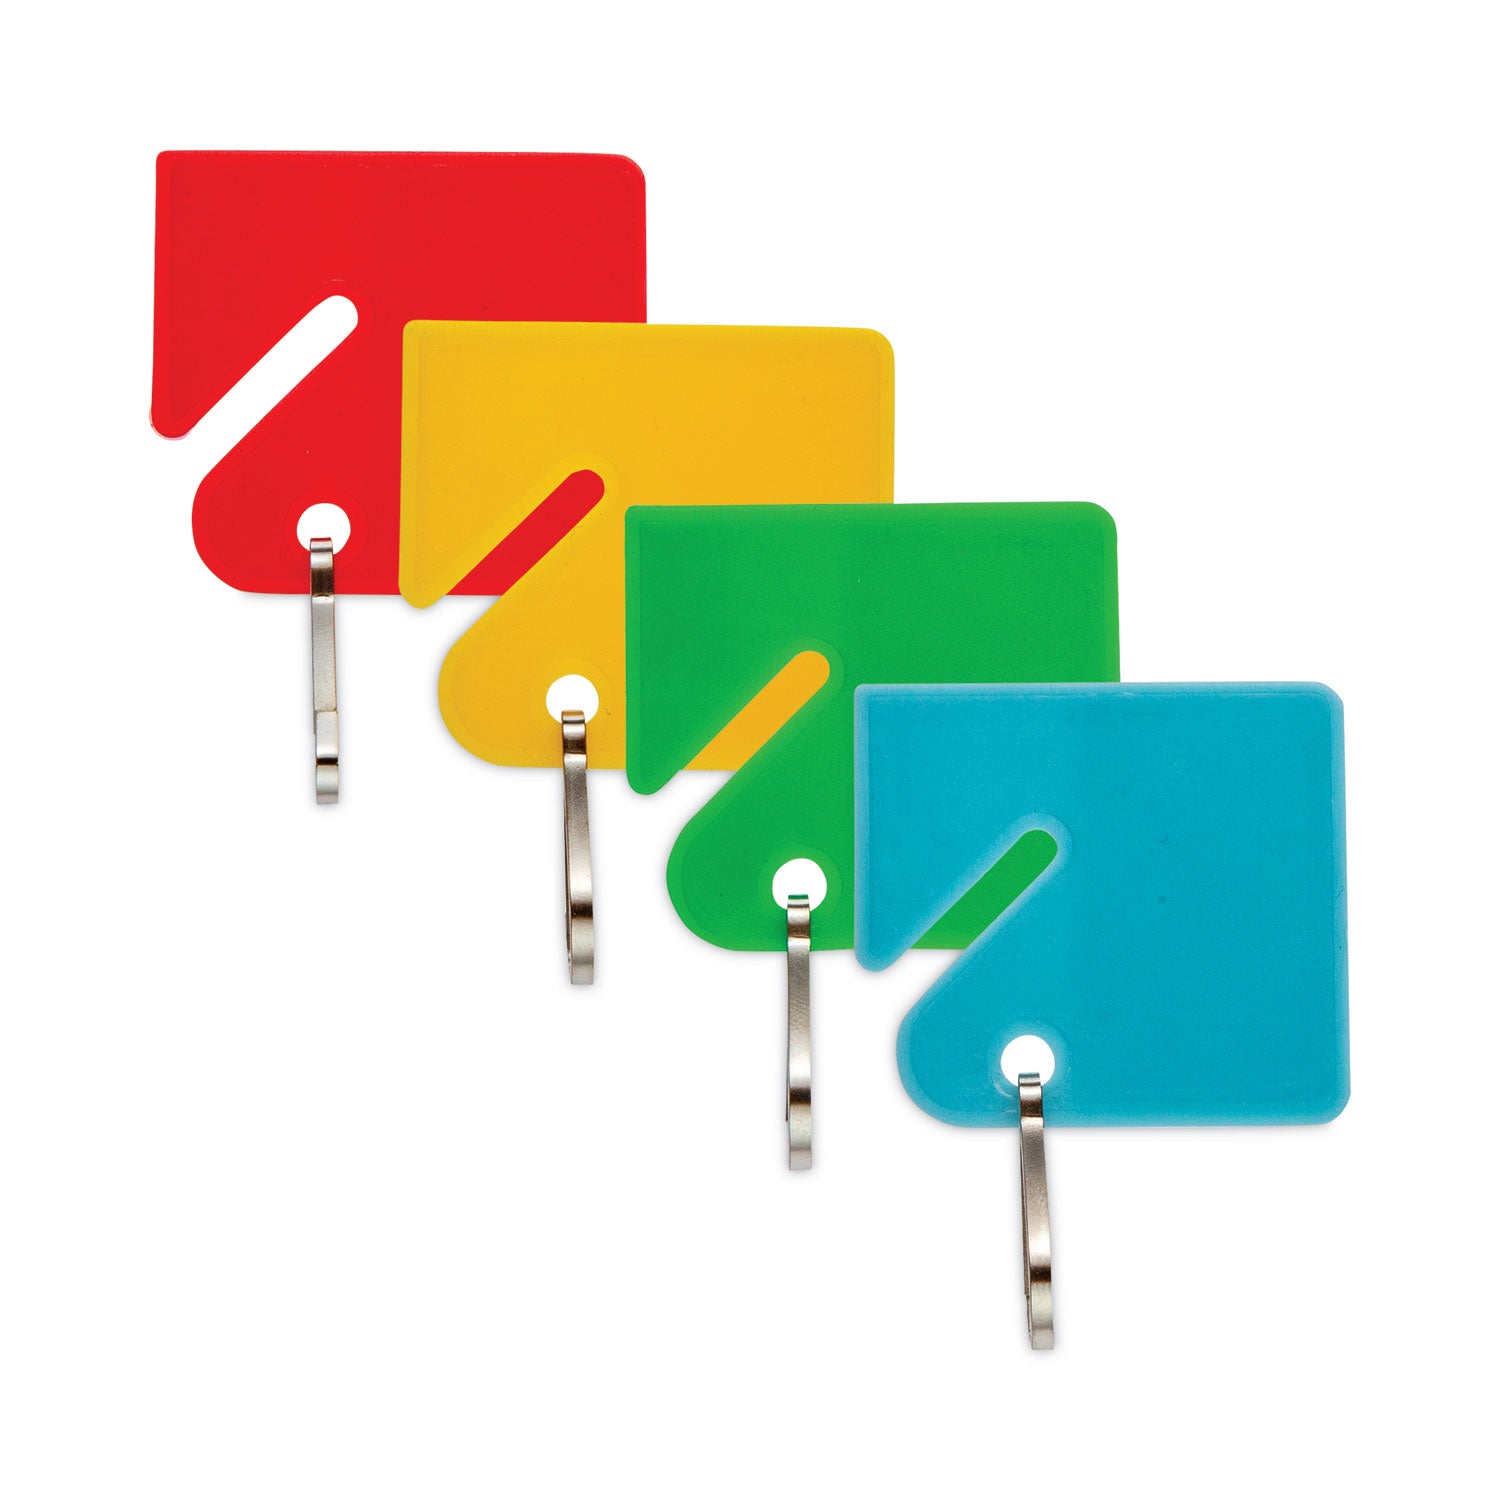 key-tags-blue-green-red-yellow-20-pack-3-packs-carton_cnk500133 - 6